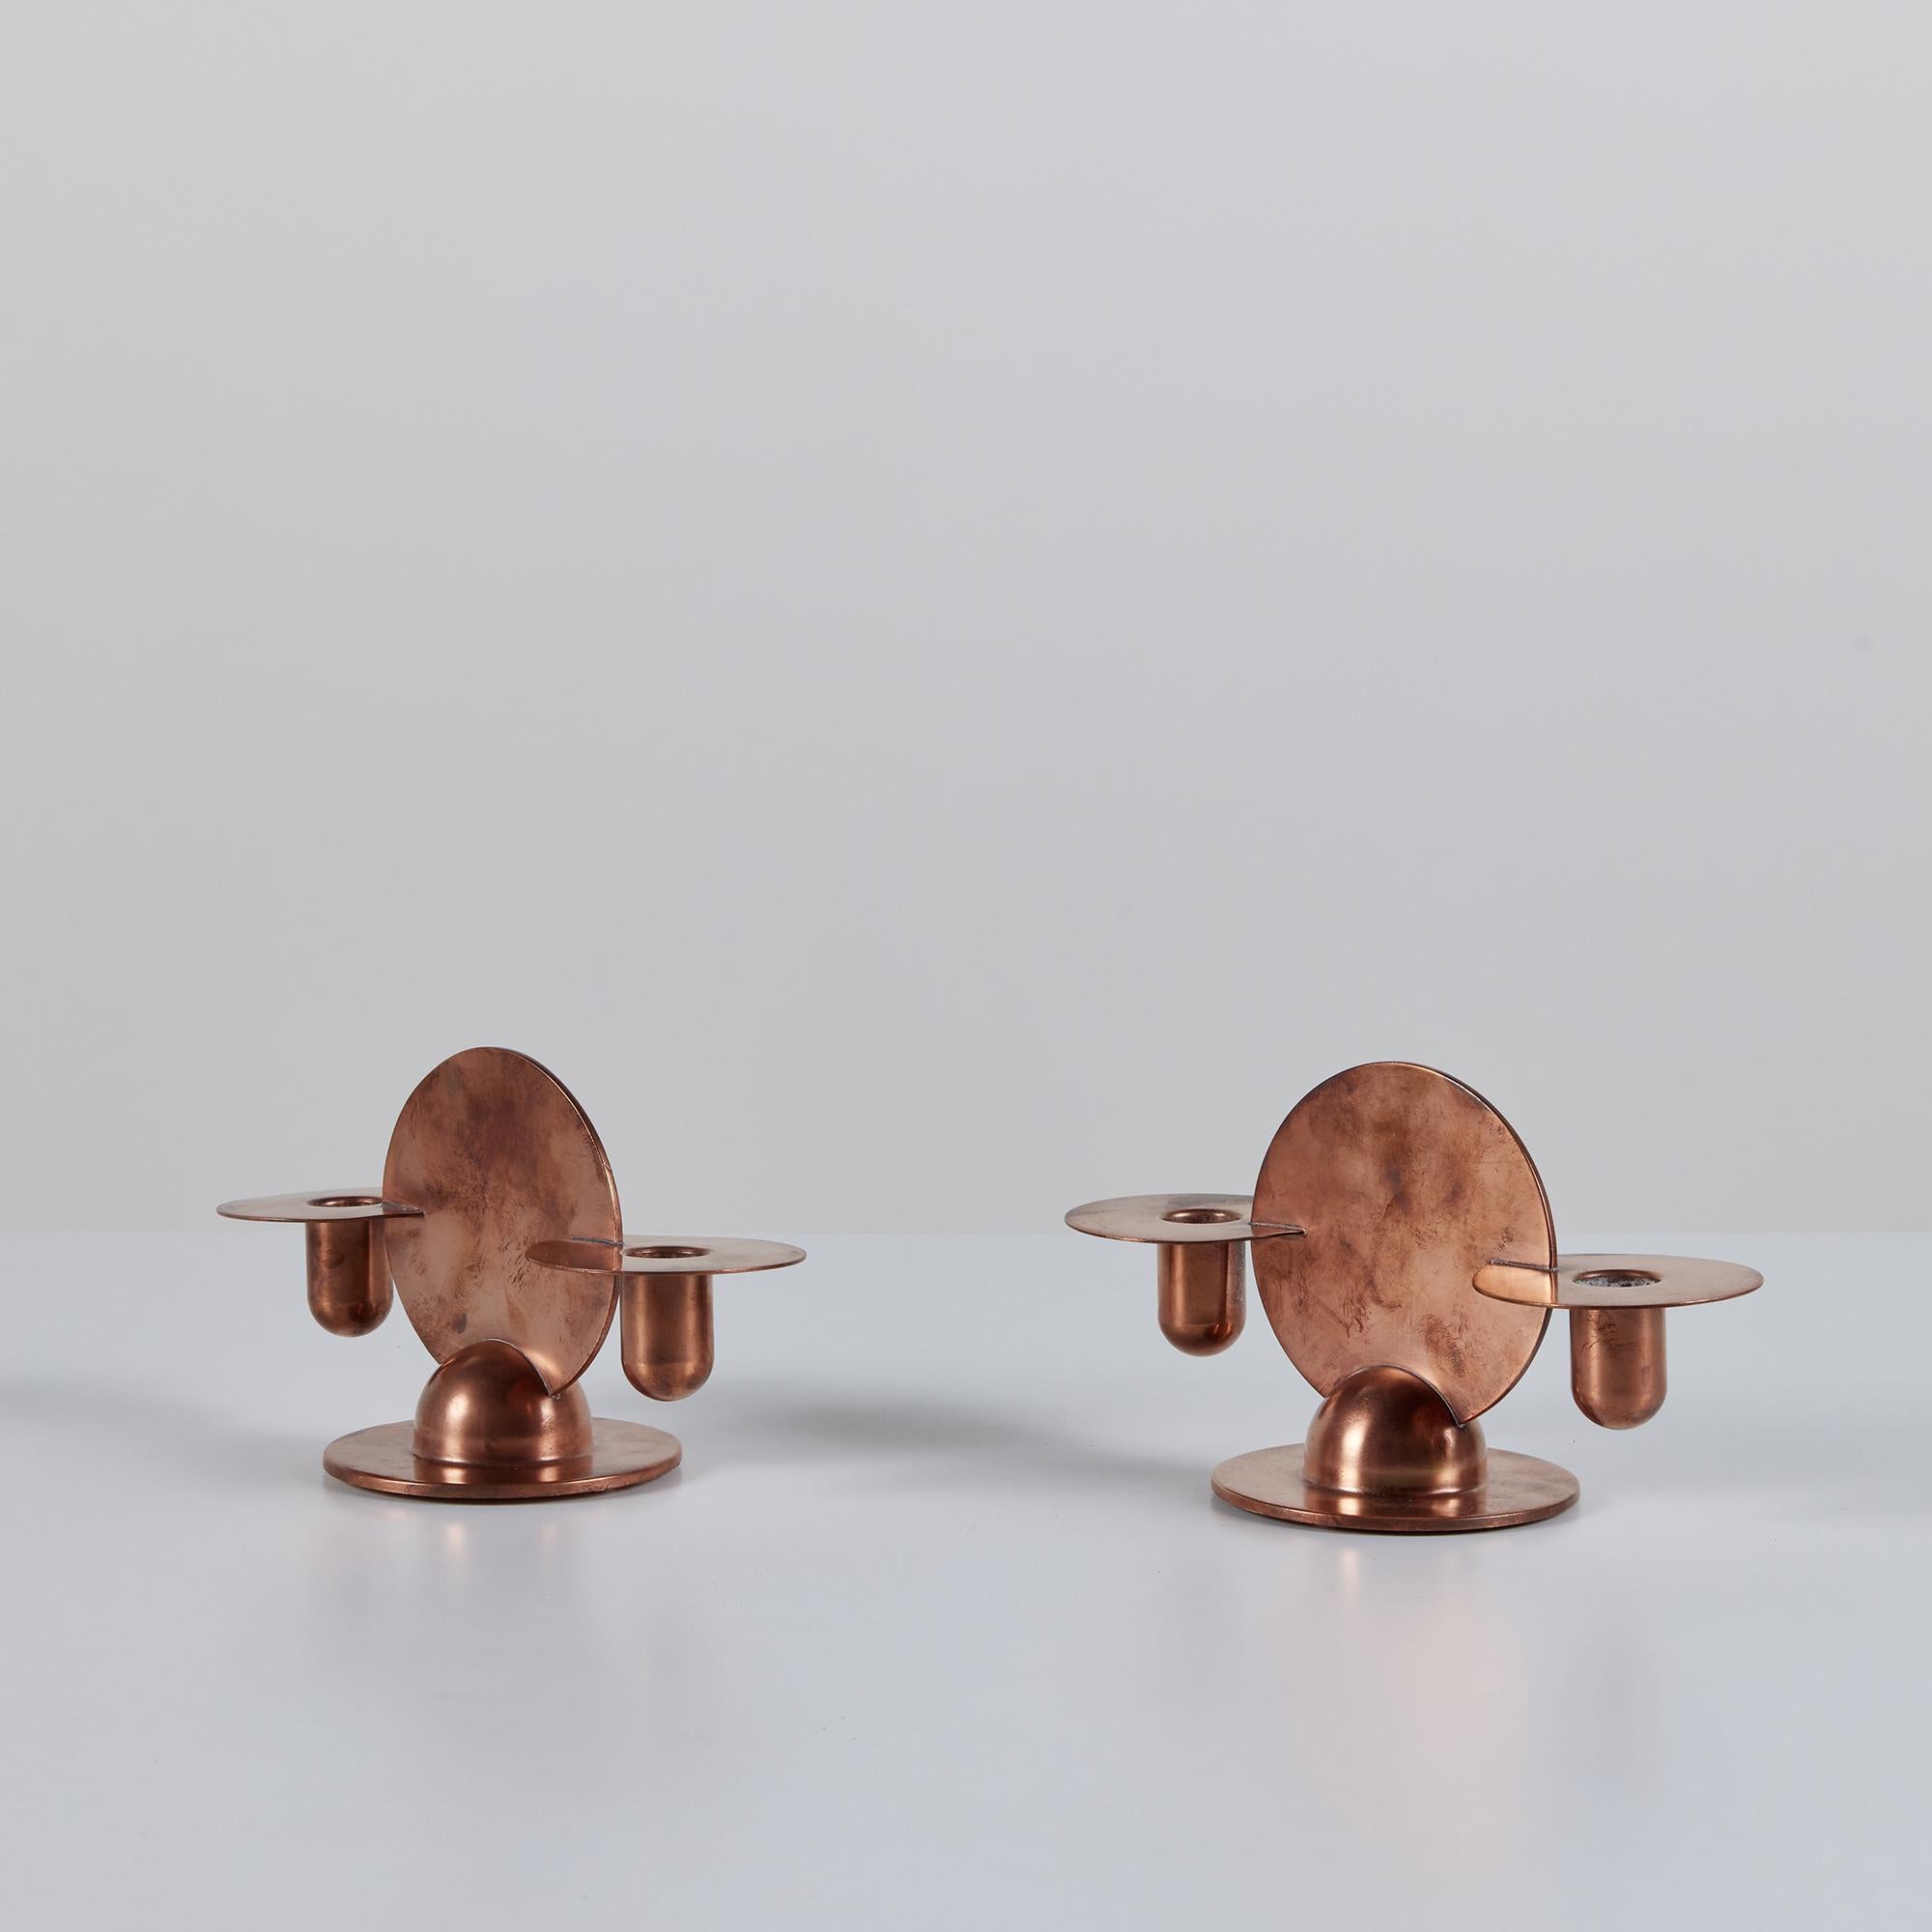 Art Deco Pair of Copper Candlestick Holders by Walter von Nessen for Chase For Sale